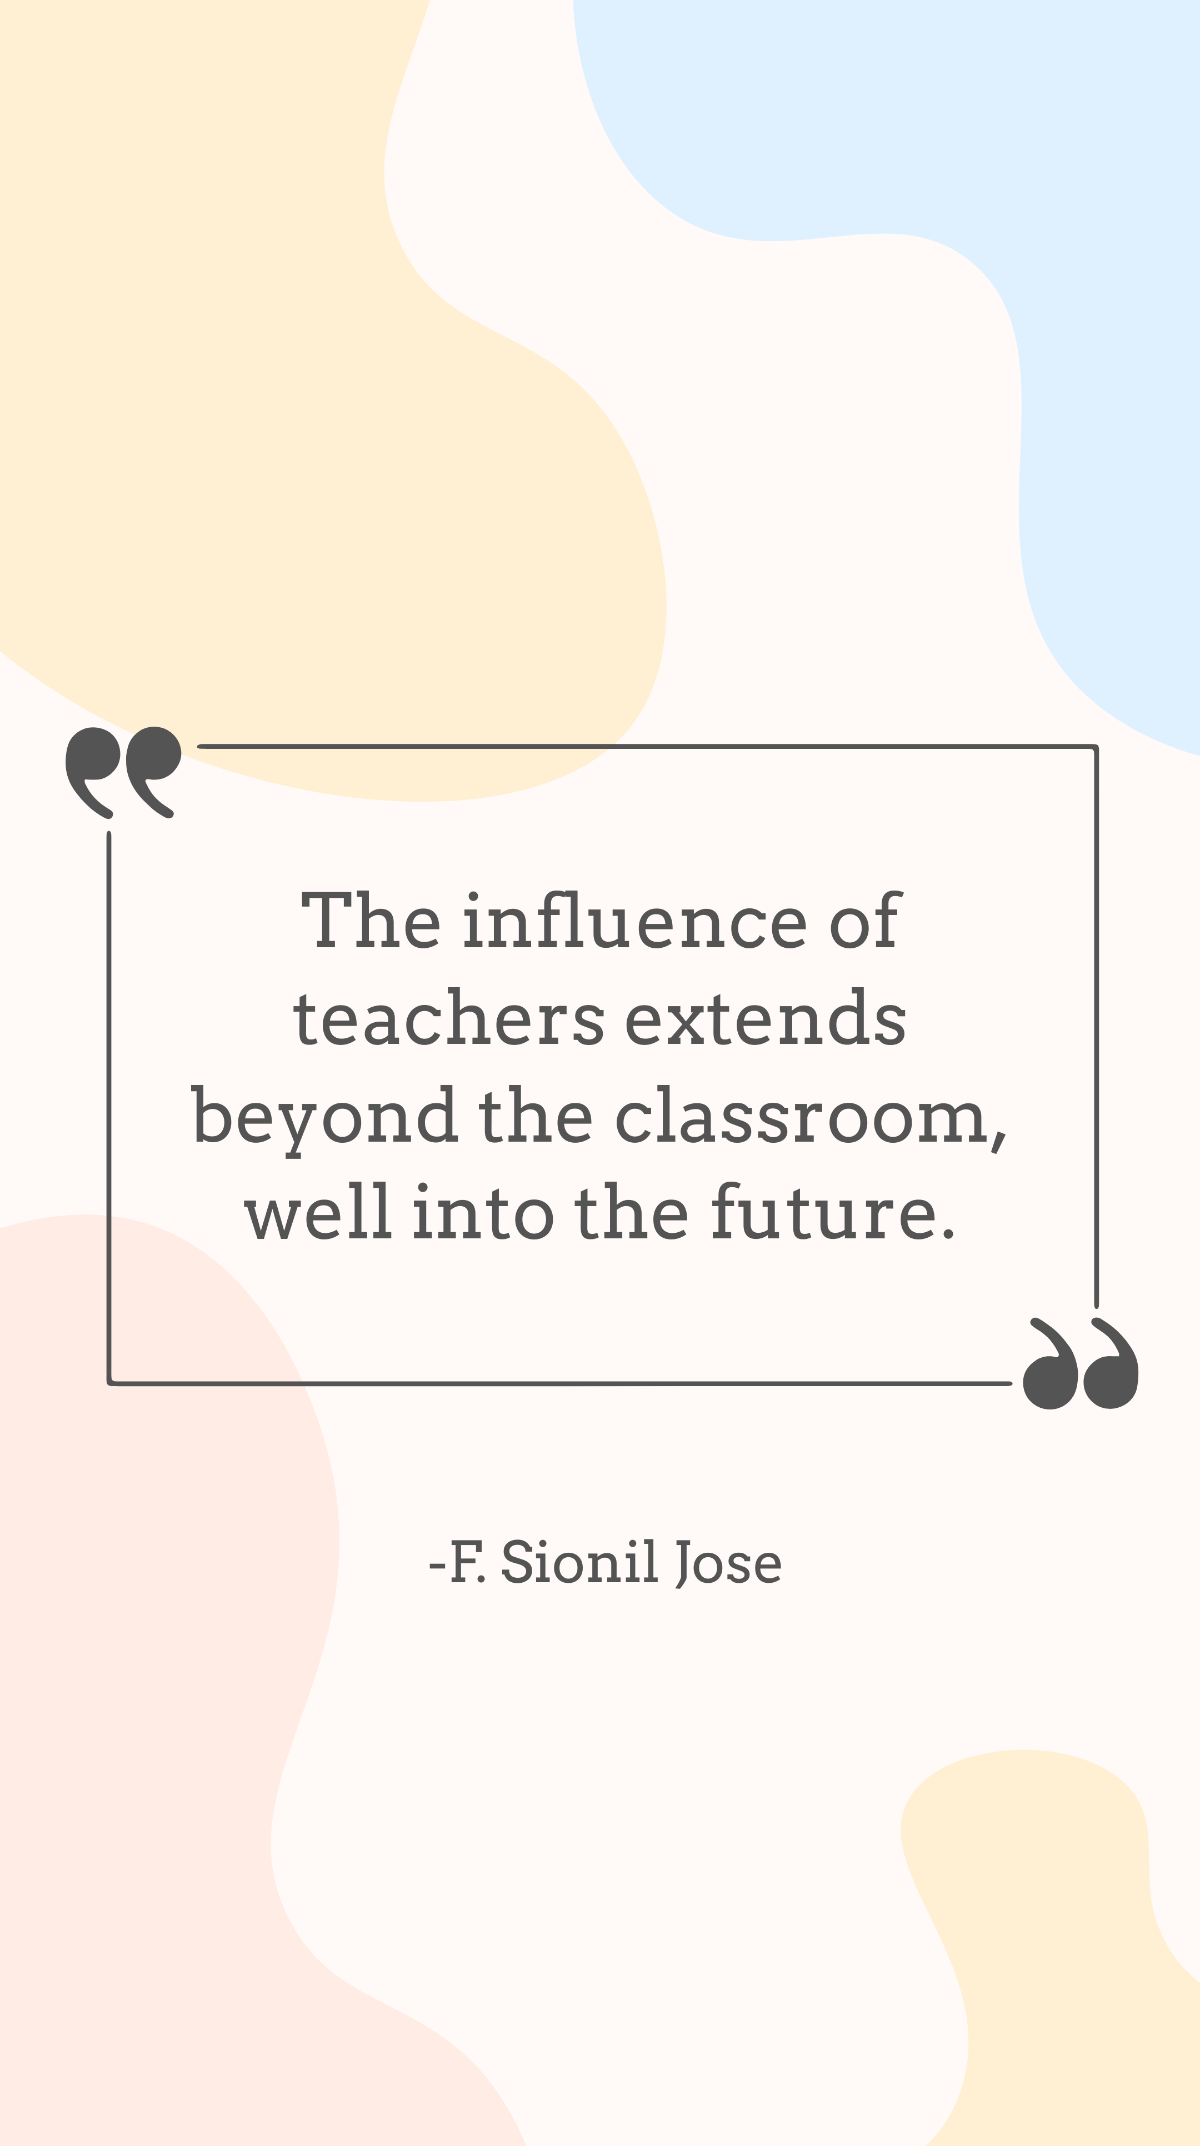 Free F. Sionil Jose - The influence of teachers extends beyond the classroom, well into the future. Template